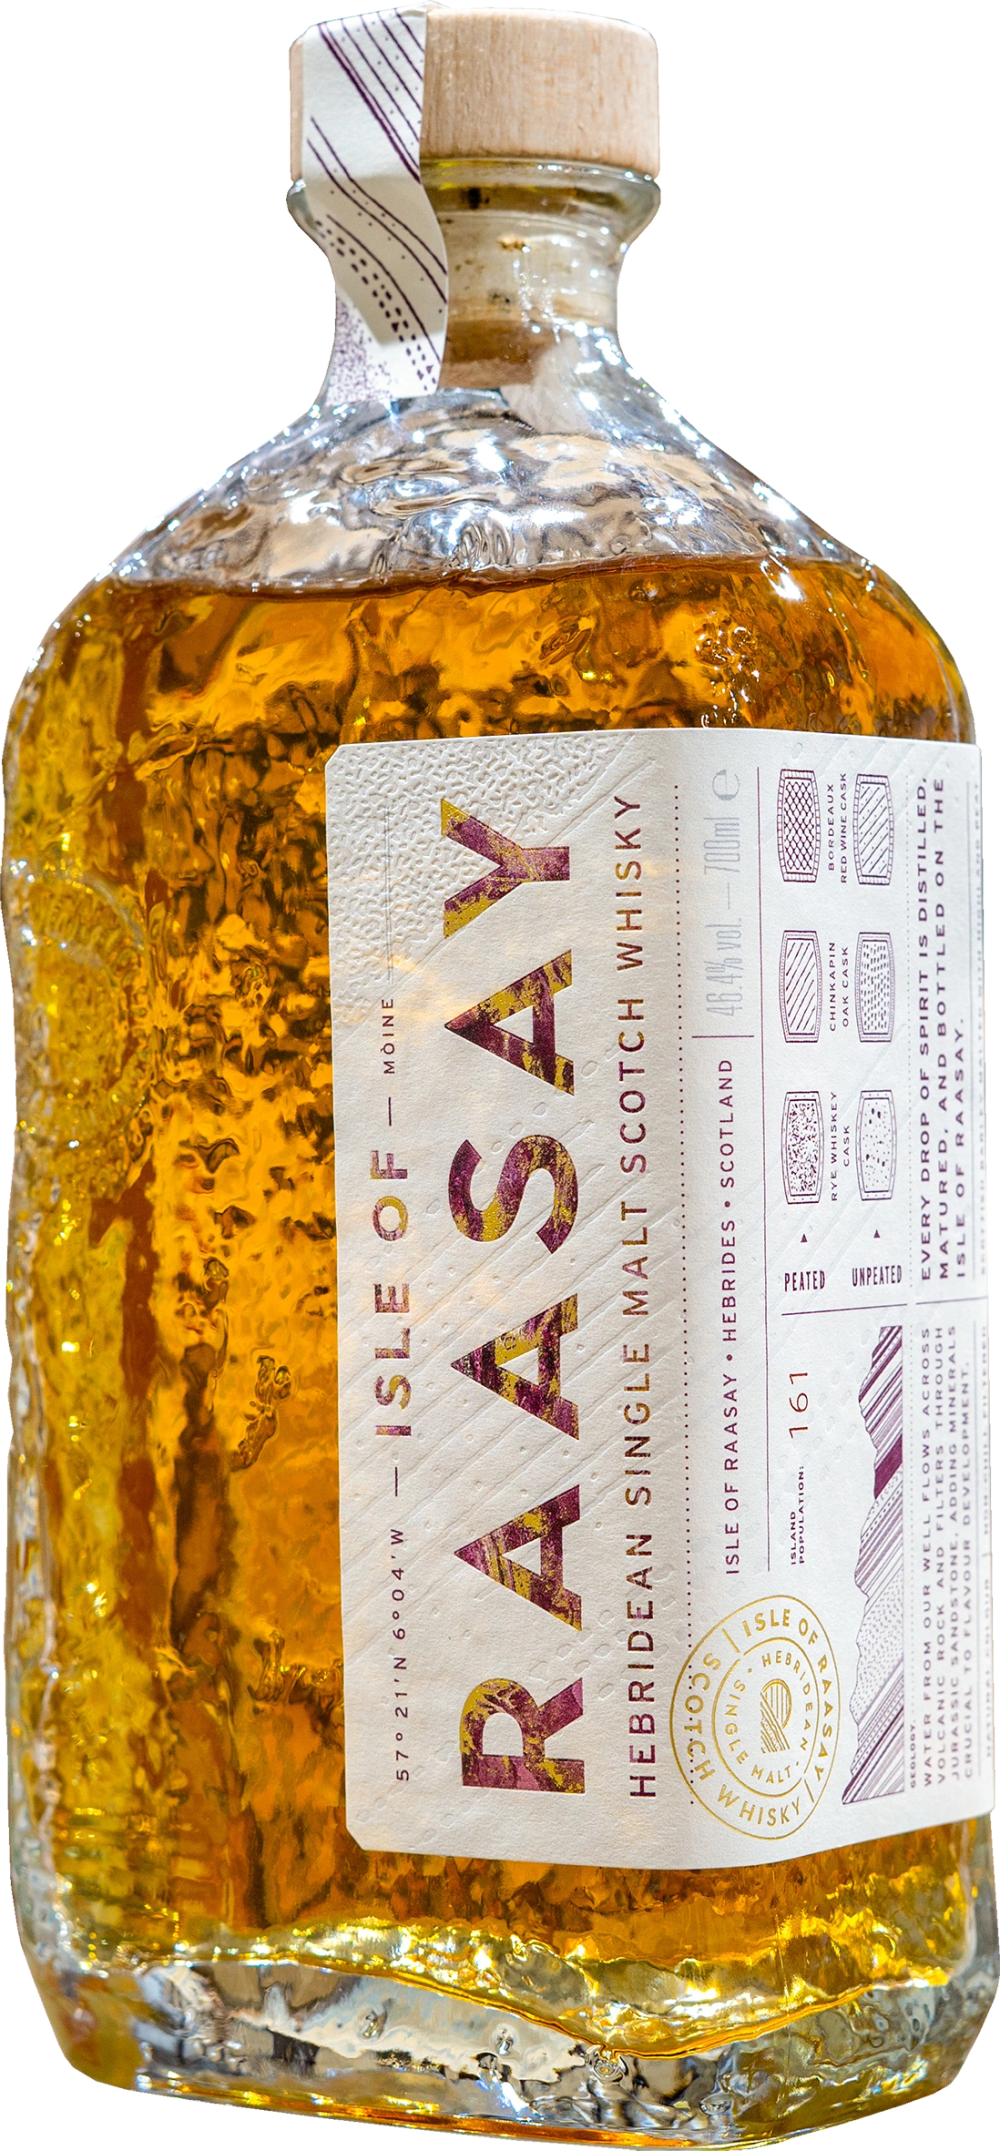 Deals on Isle of Raasay Single Malt from Calle at 39,99 €